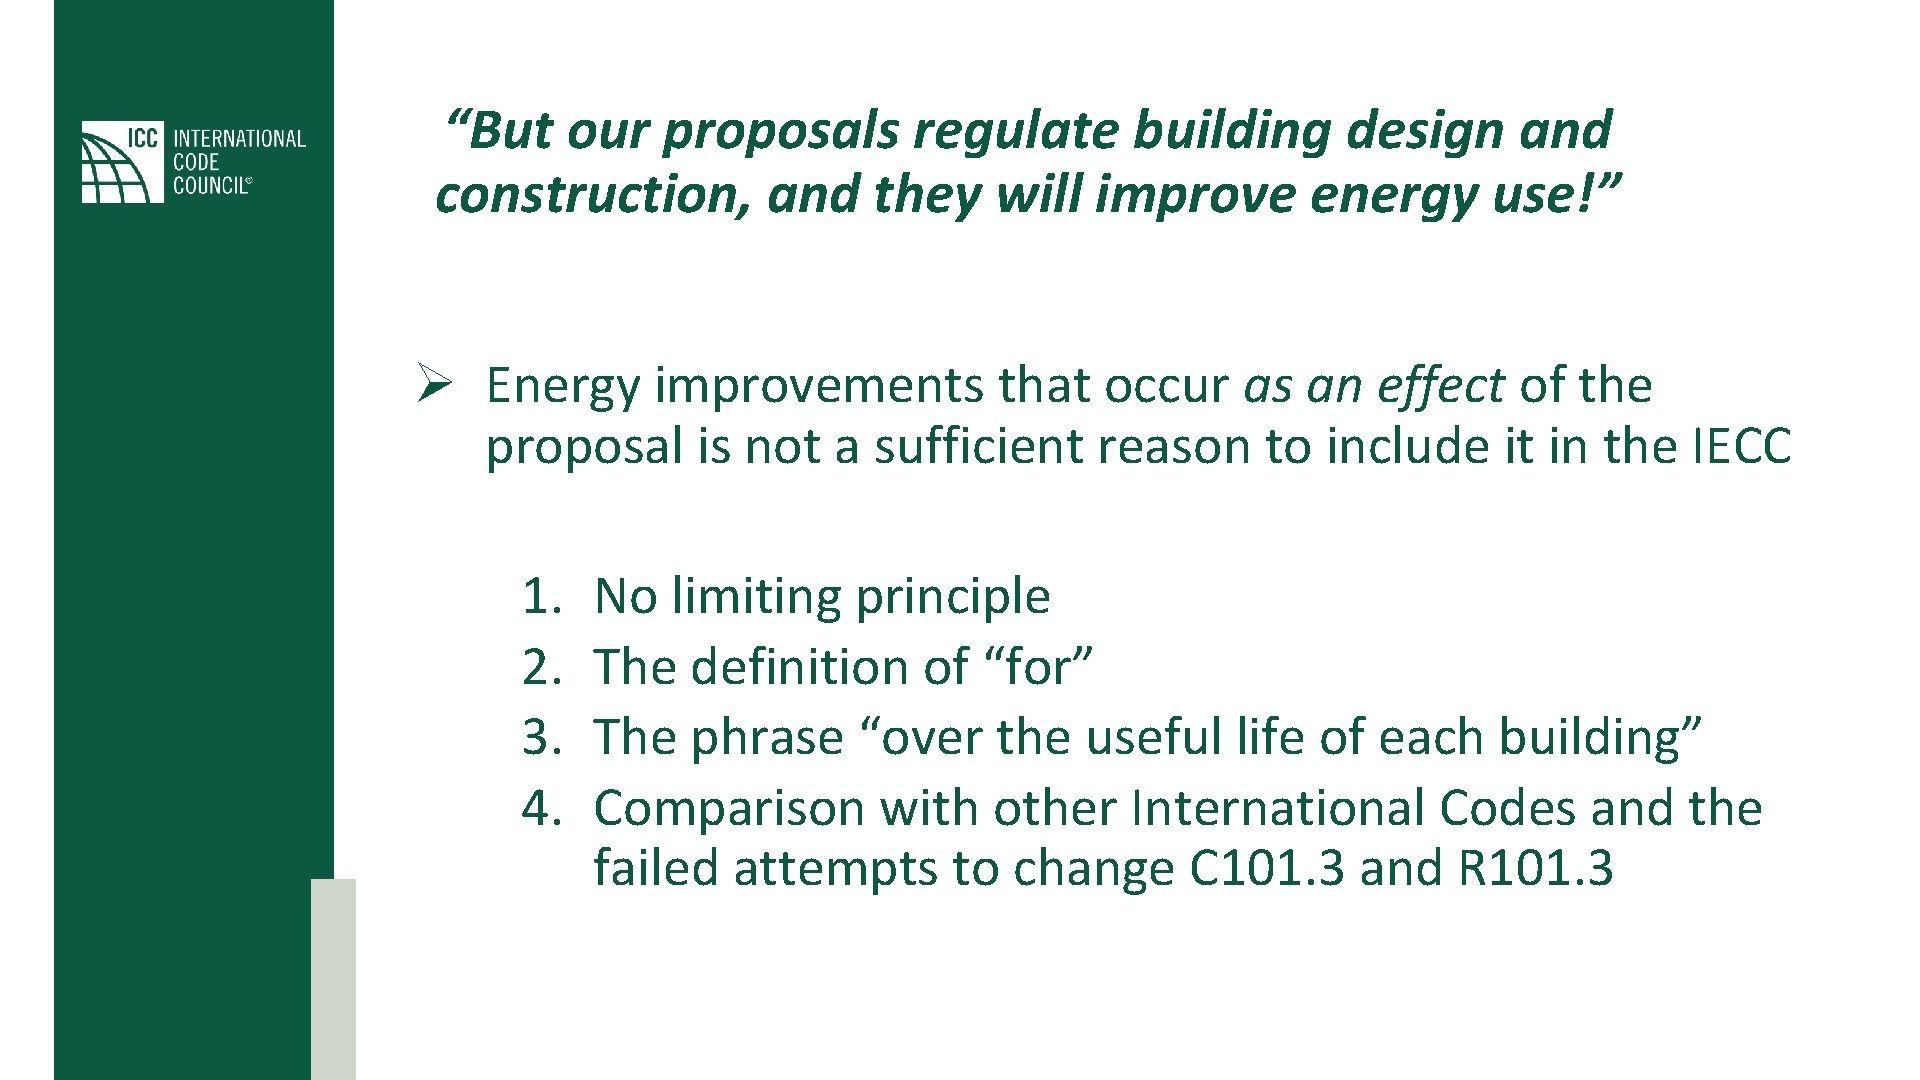 “But our proposals regulate building design and construction, and they will improve energy use!”